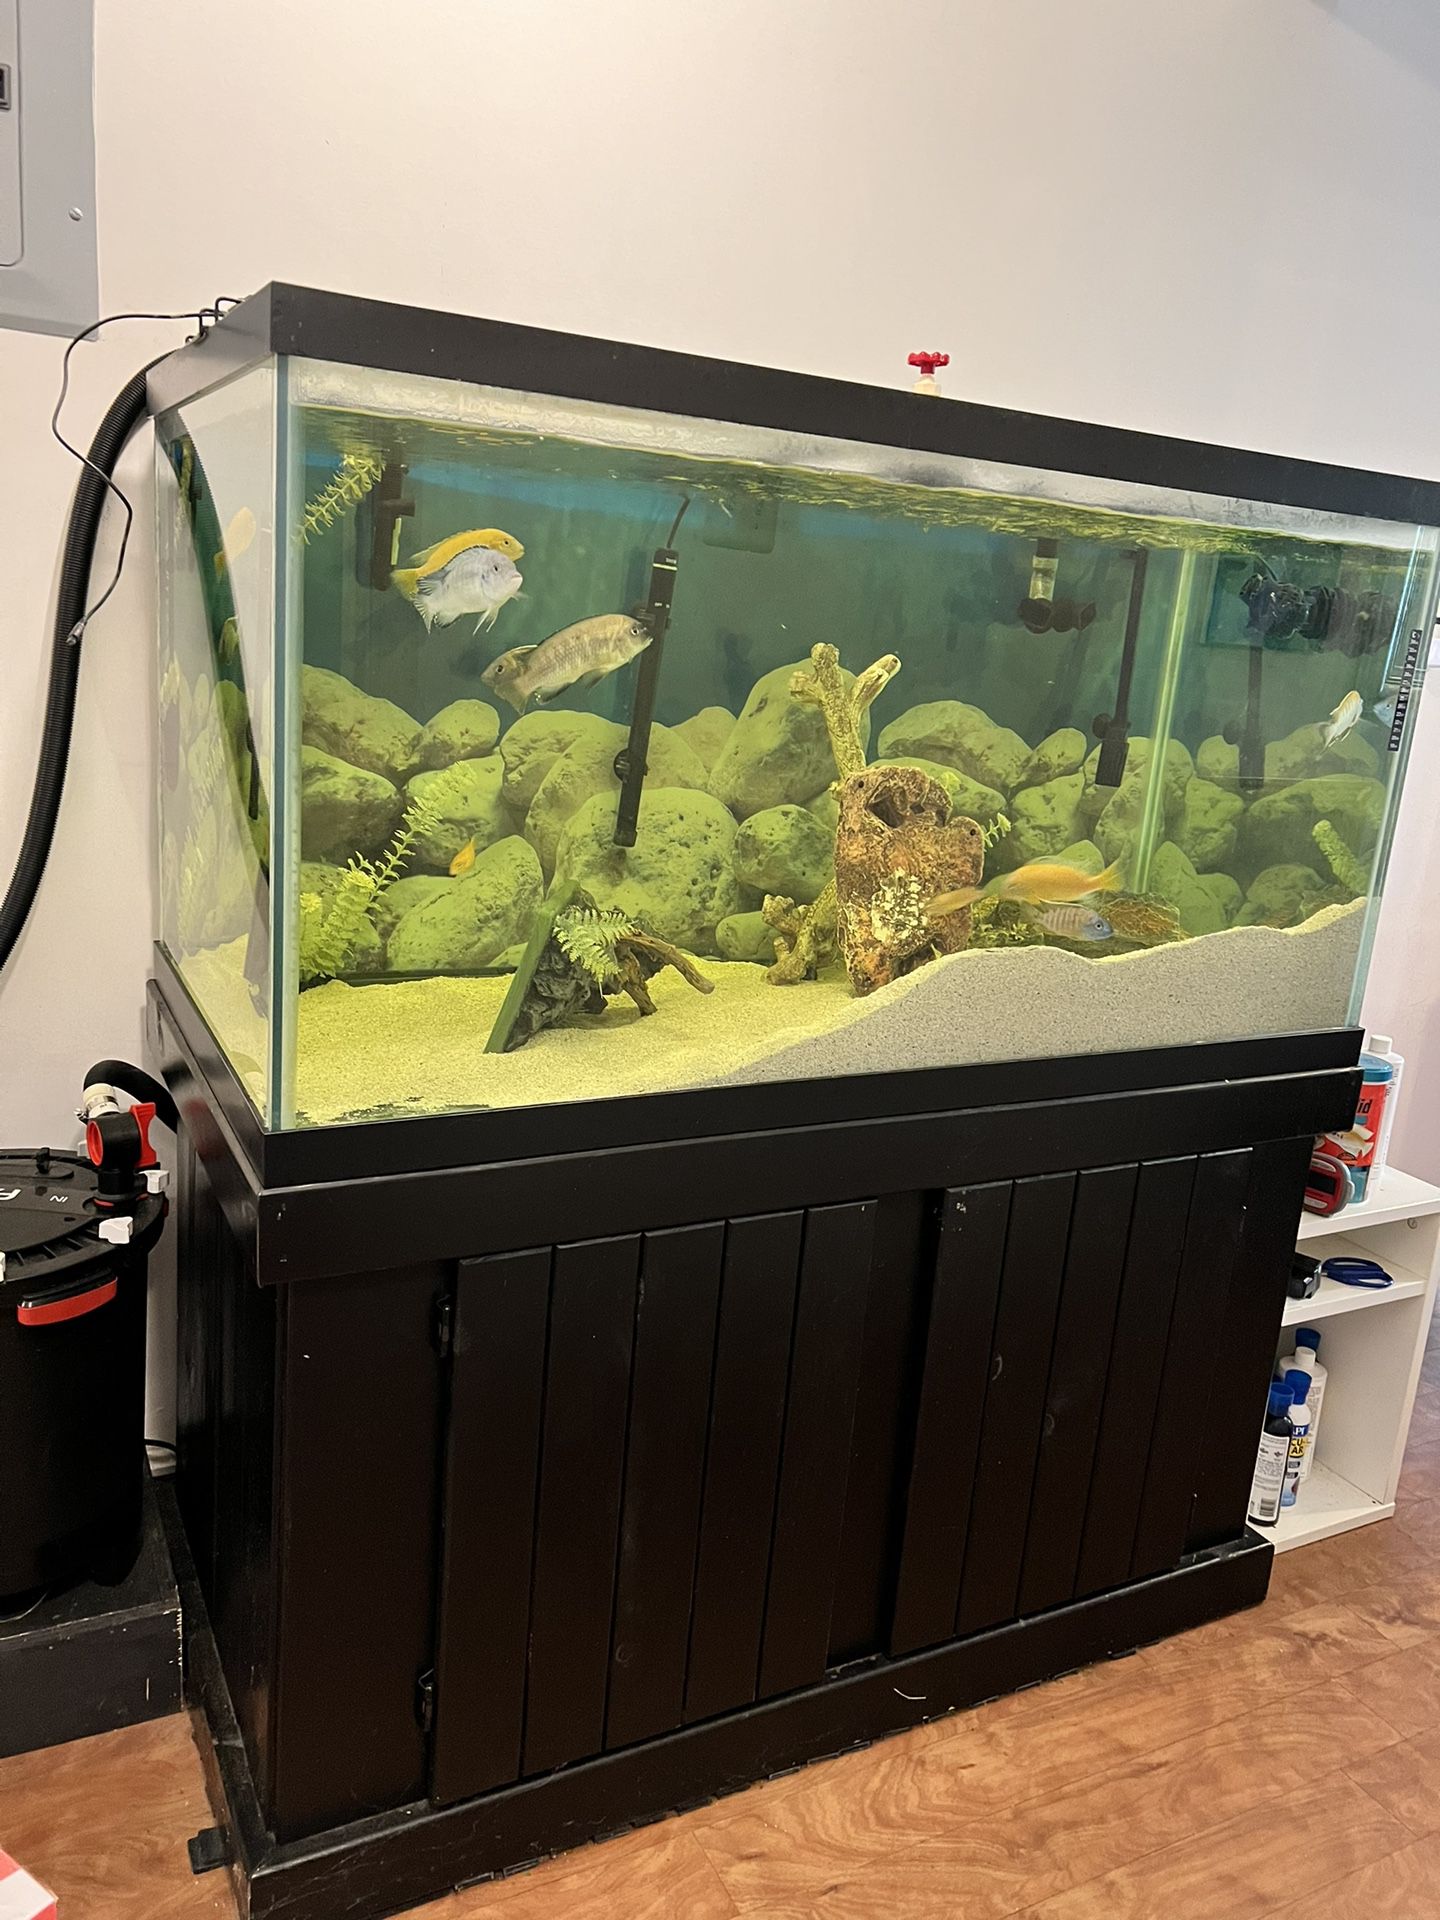 120 Gal Fish Tank Comes With Fx4 Filter, Fluval 409 Filter, Light And Cabinet.